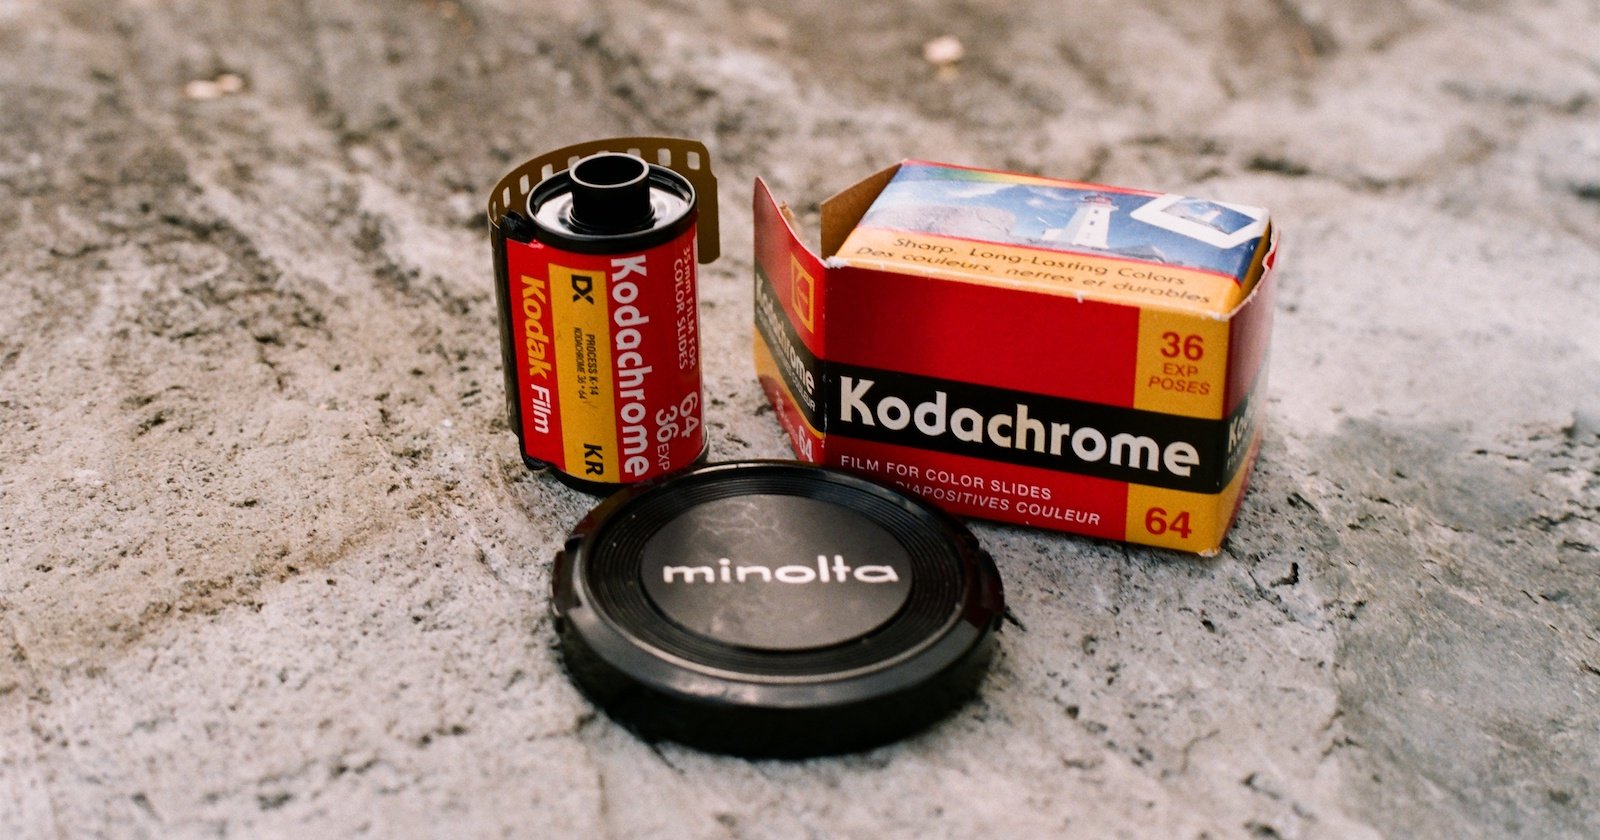 Kodak Backtracks, Says it Would Be Very Difficult to Revive Kodachrome